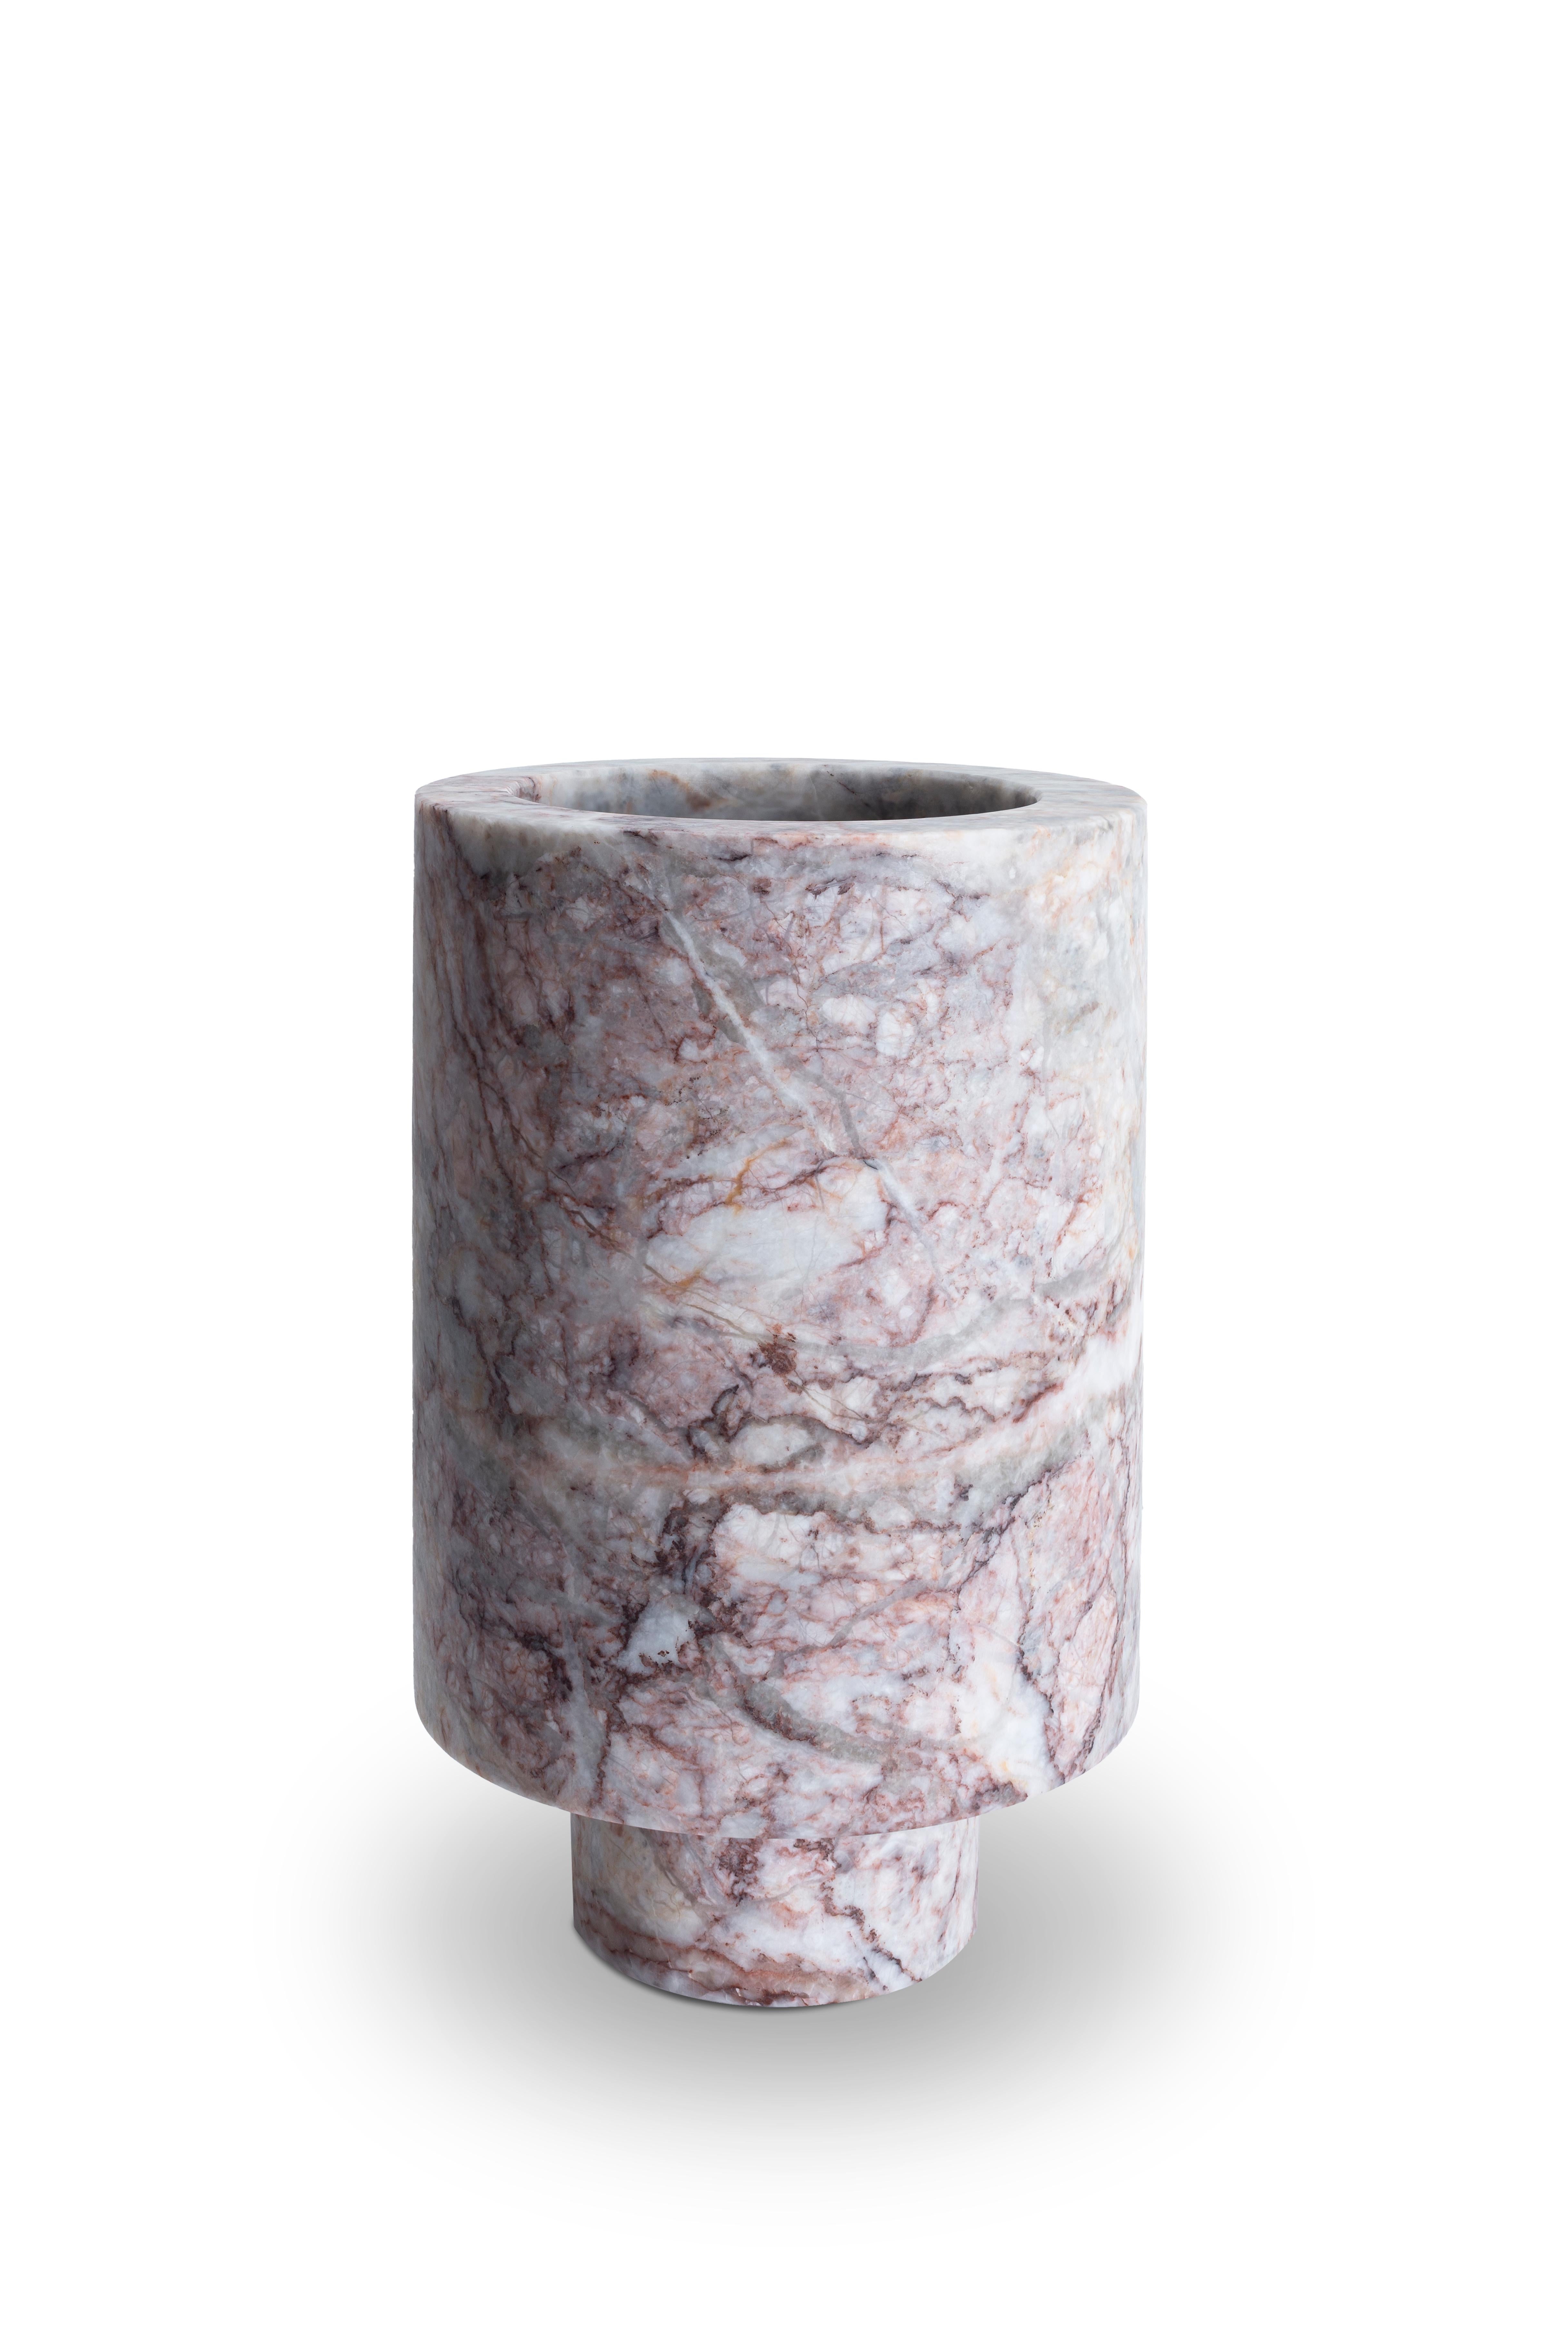 Contemporary Marble Inside Out Vase by Karen Chekerdjian For Sale